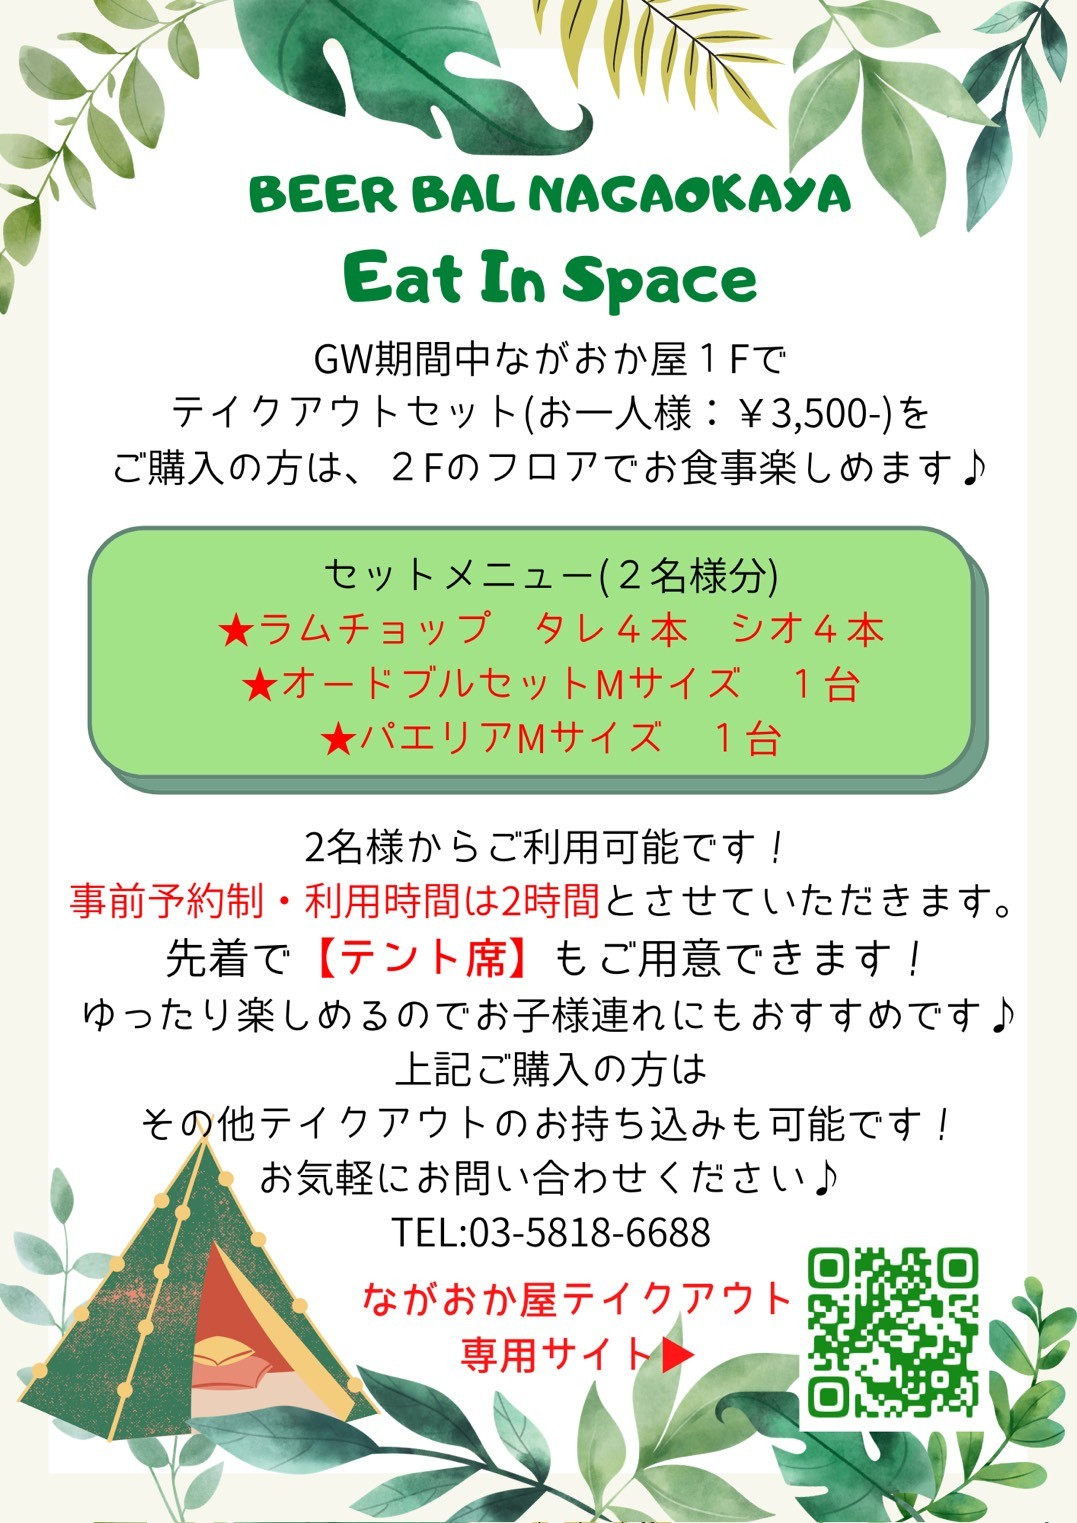 Eat In Space